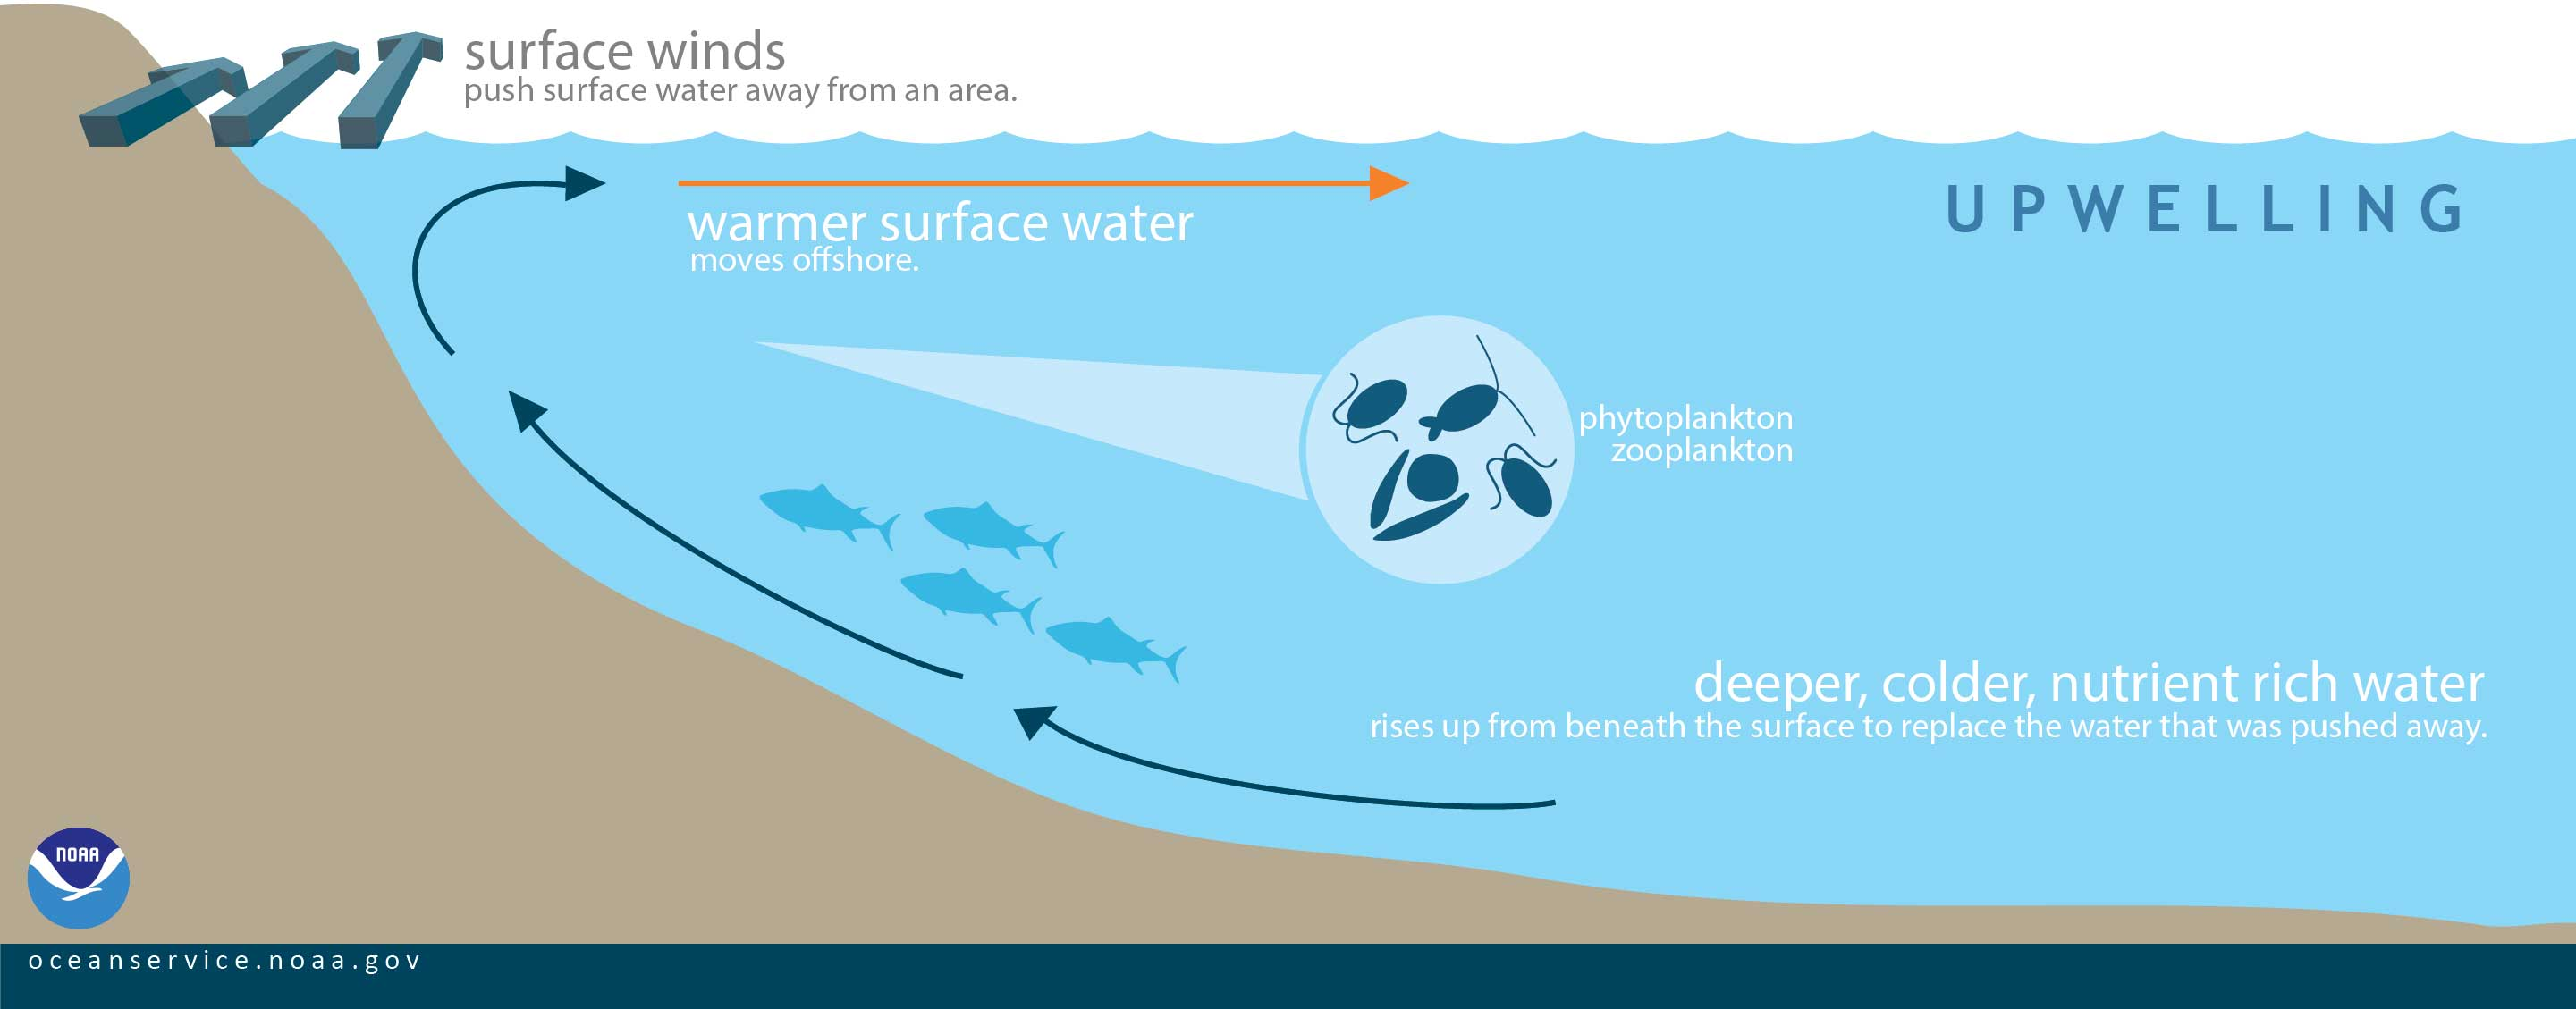 infographic showing how surface winds affect water